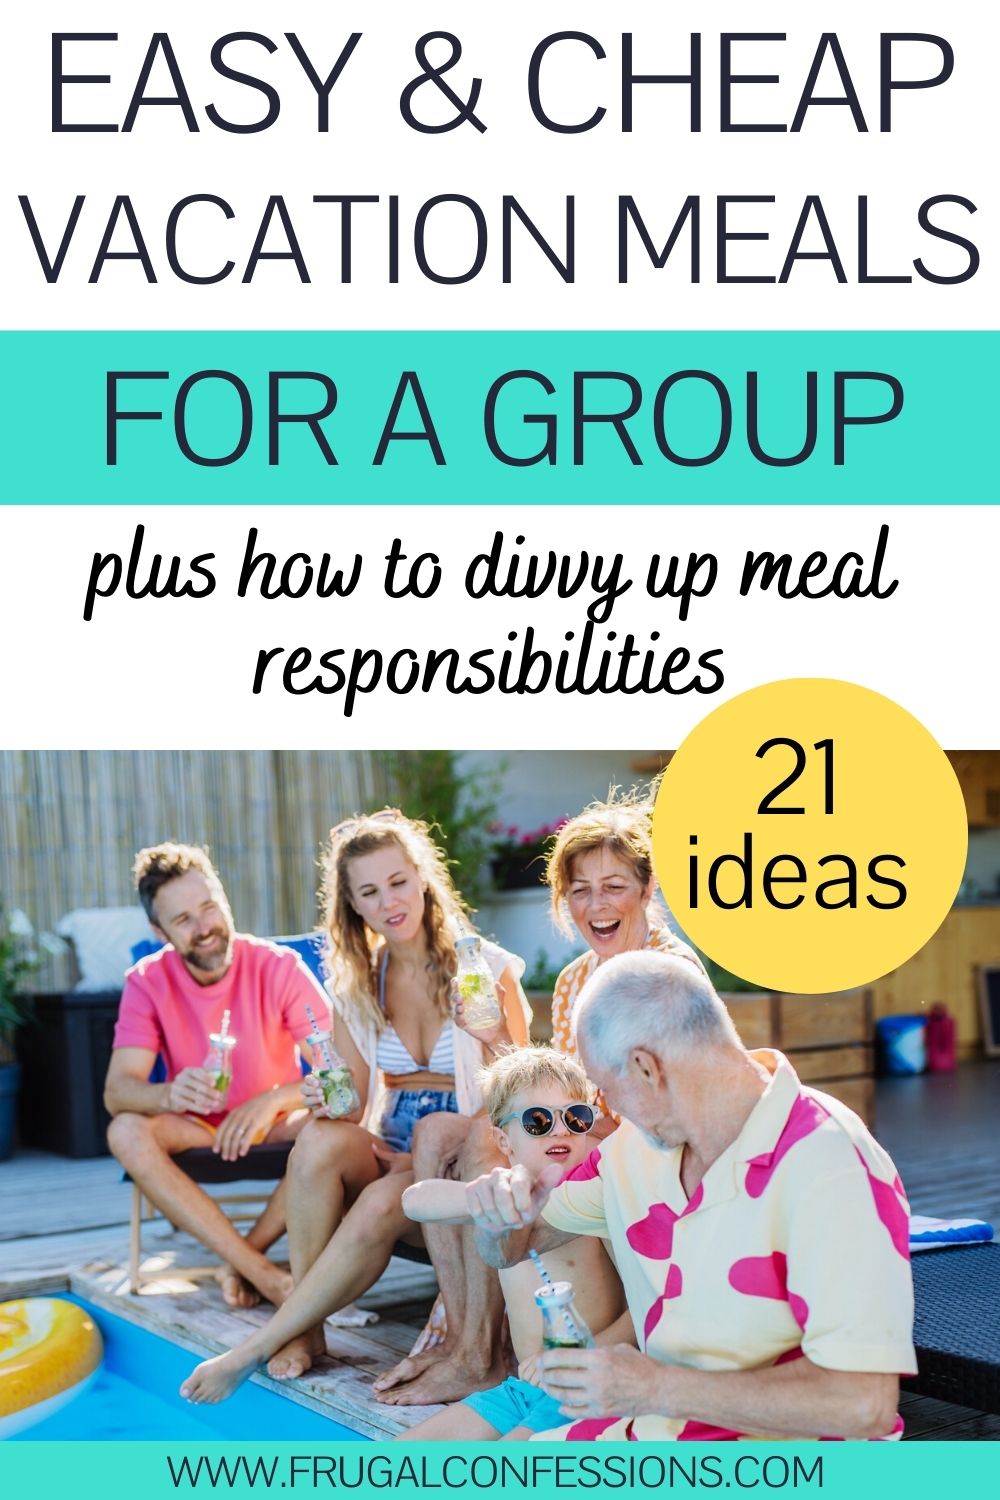 group of people vacationing at pool, text overlay "easy and cheap vacation meals for a group"